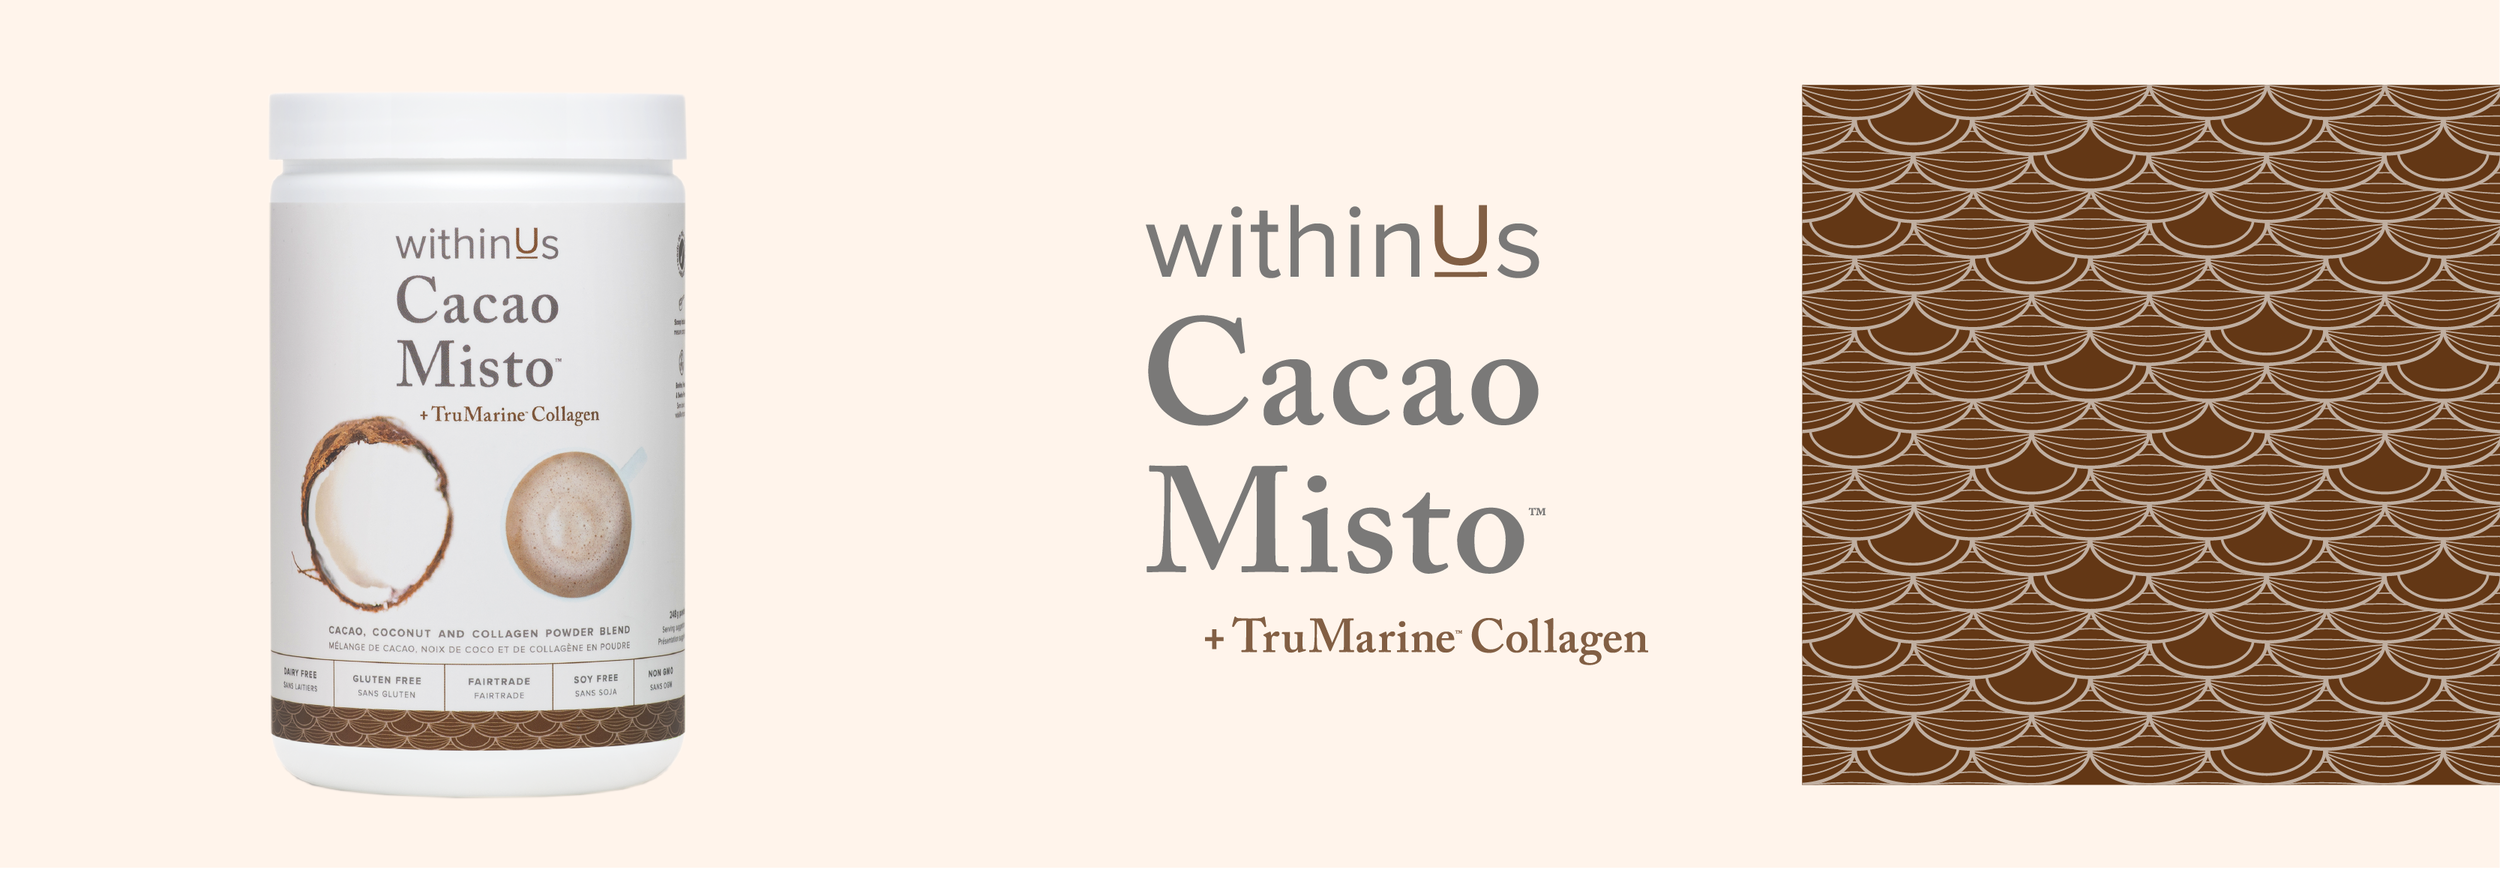 withinUs-Product-Design_Cacao_Misto.png